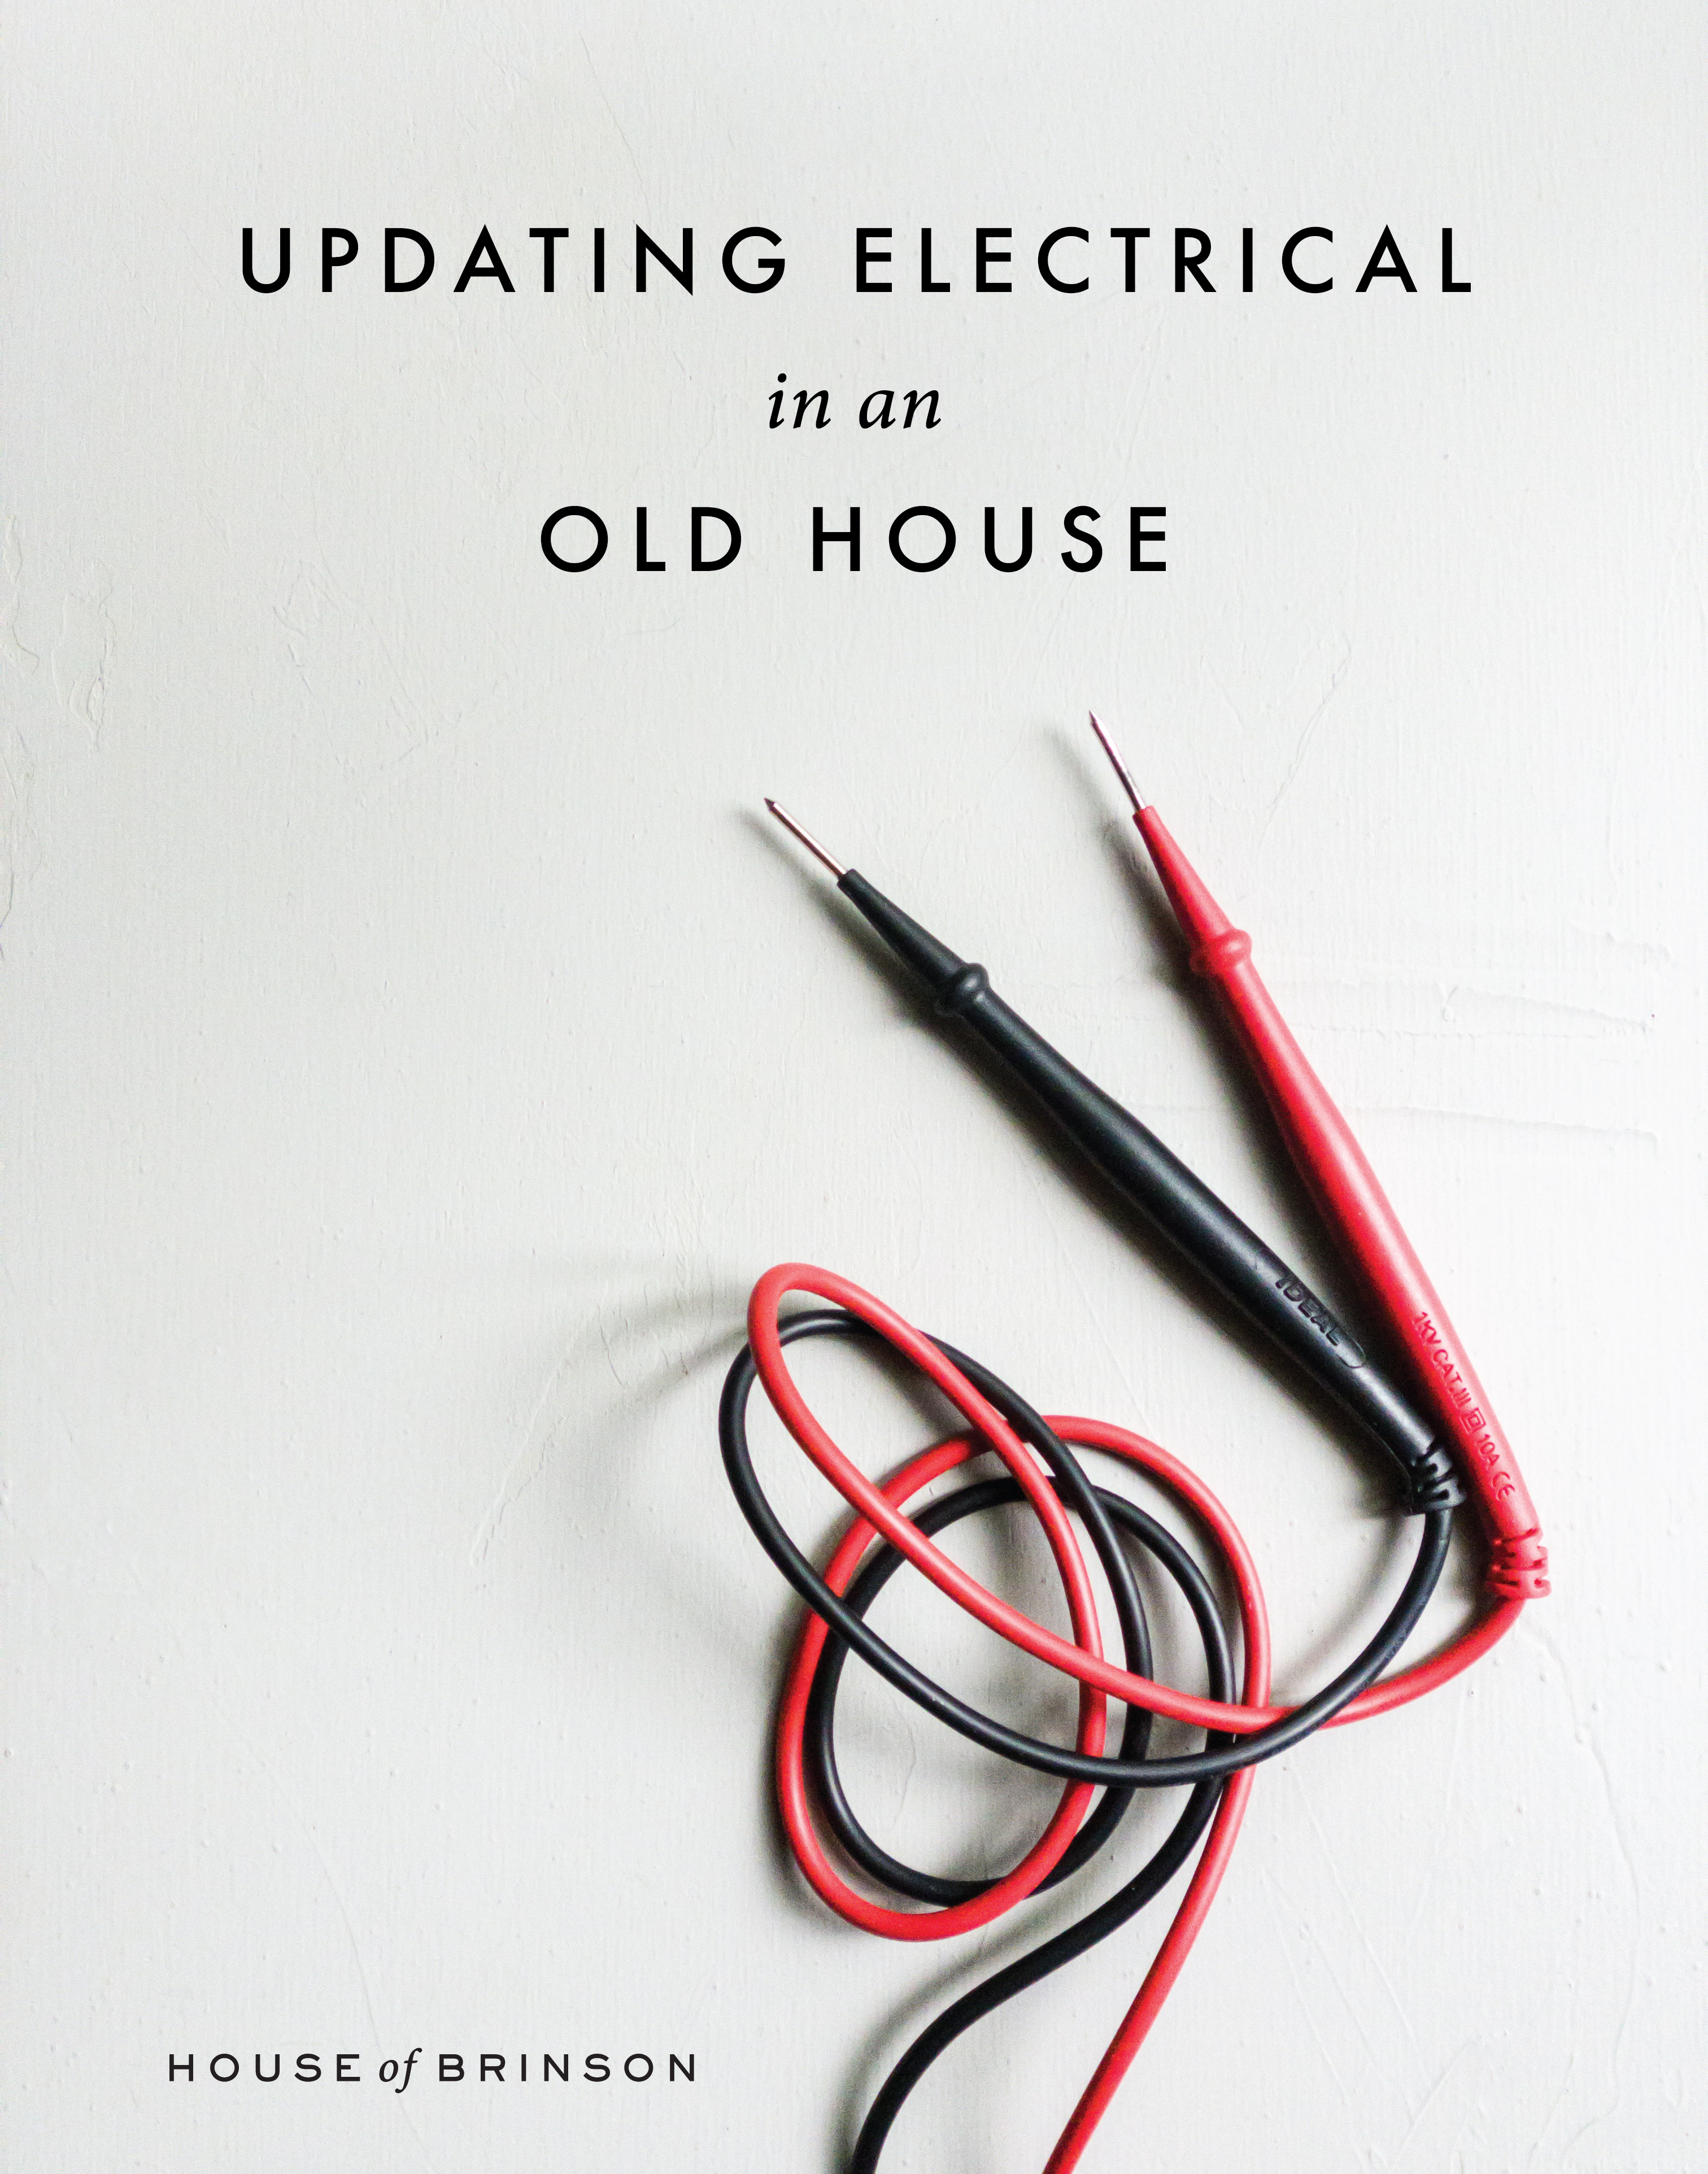 Updating The Electrical In An Old House, How To Install New Wiring In Old House